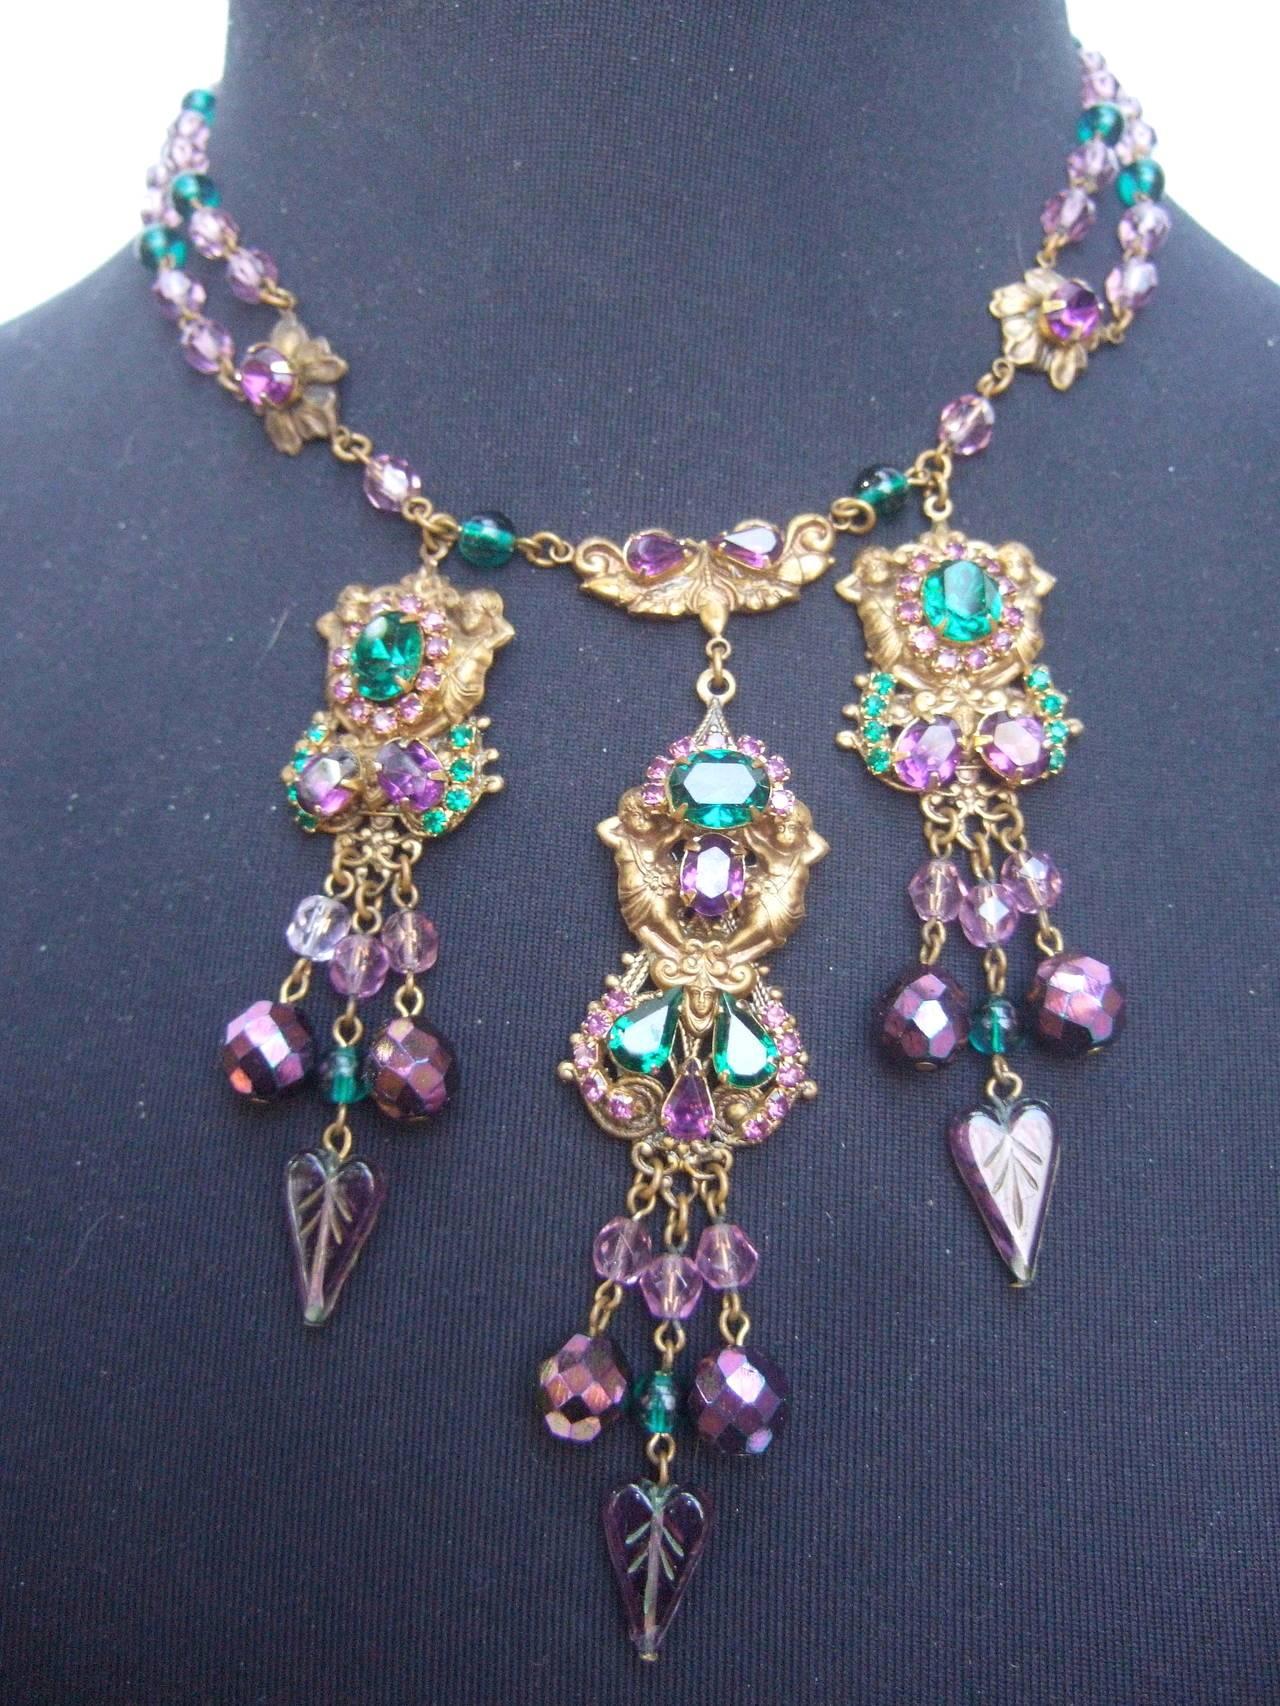 Romantic Exquisite Crystal Jeweled Tiered Necklace. 1950's.